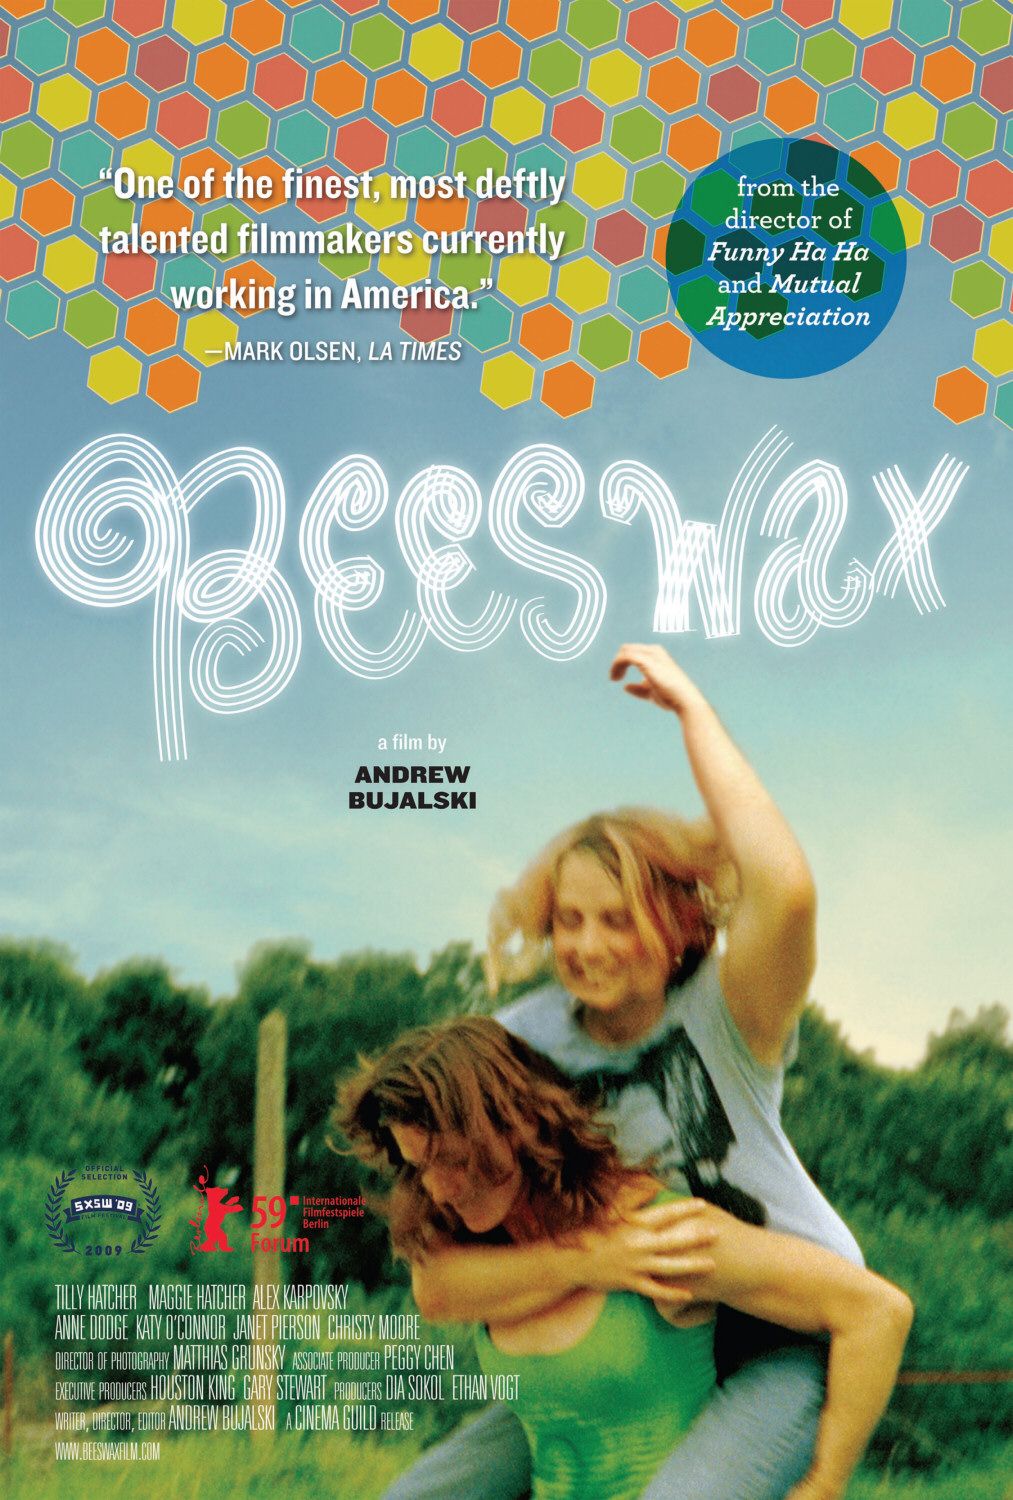 Extra Large Movie Poster Image for Beeswax 